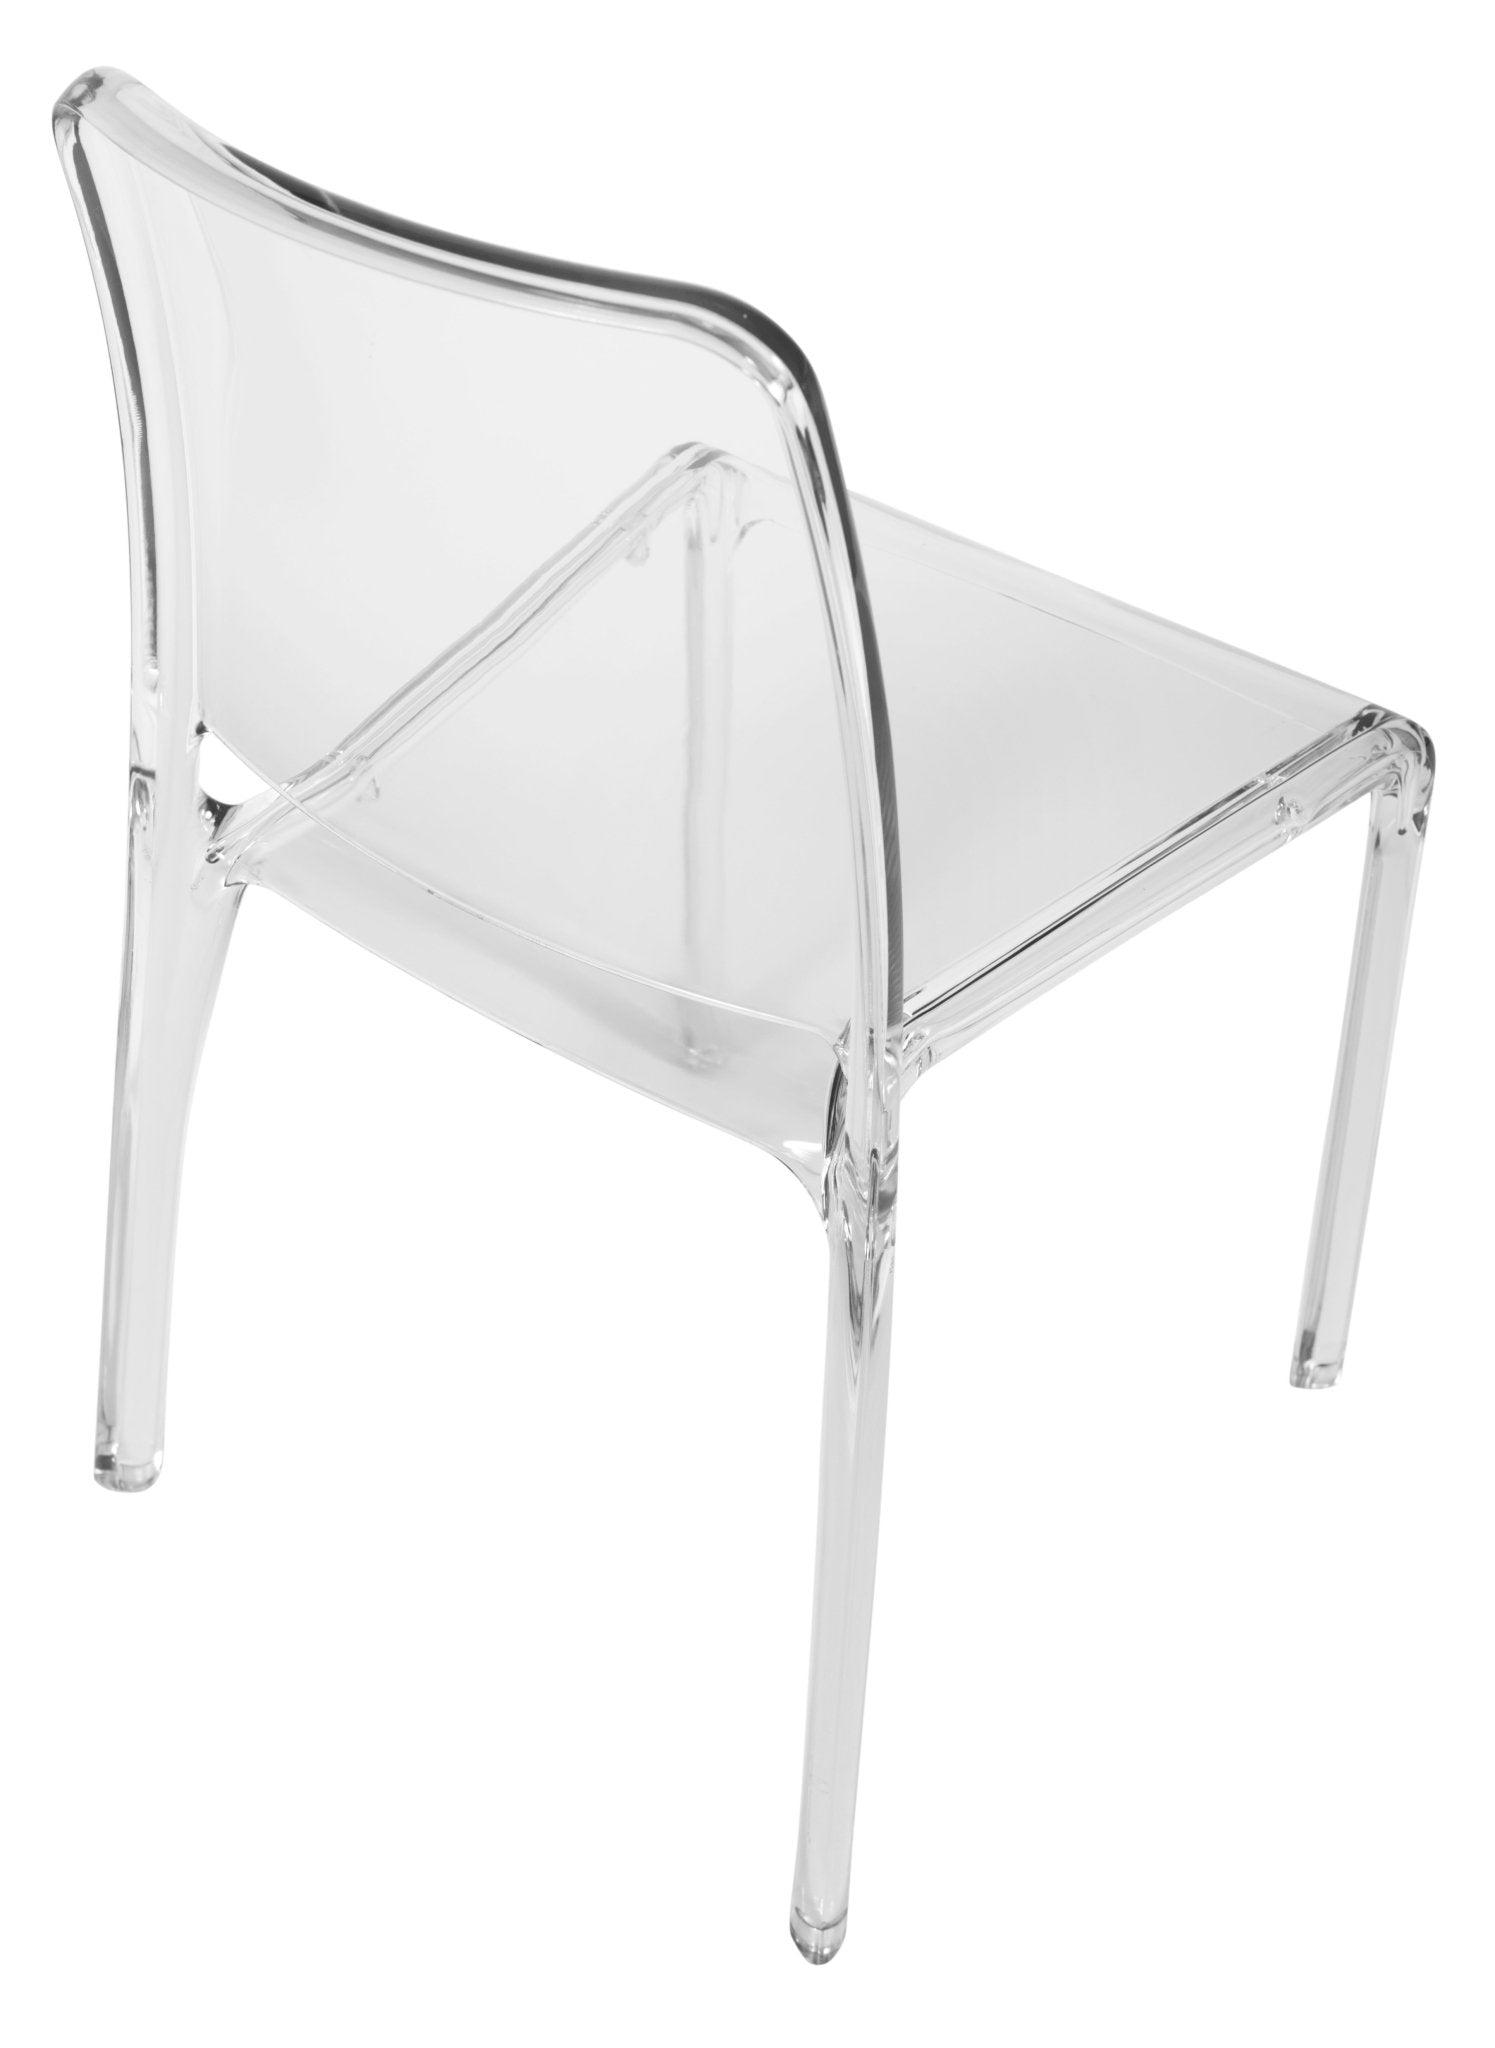 Clarity dining room chair (clear) pack of 4 - crimblefest furniture - image 2